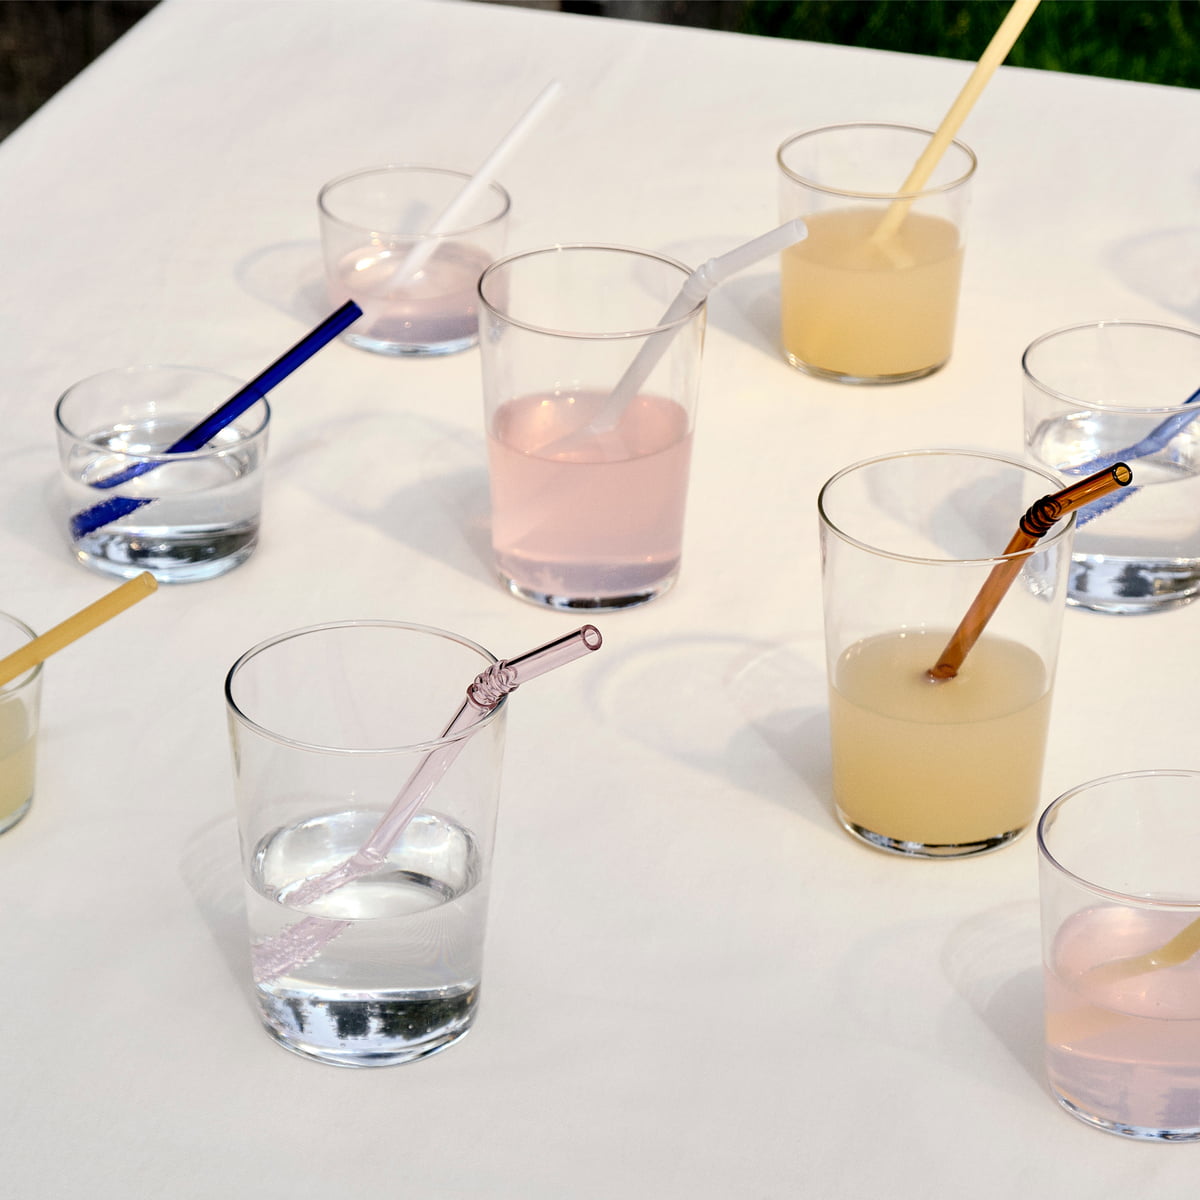 Sip in style with Saint Laurent's metal straws